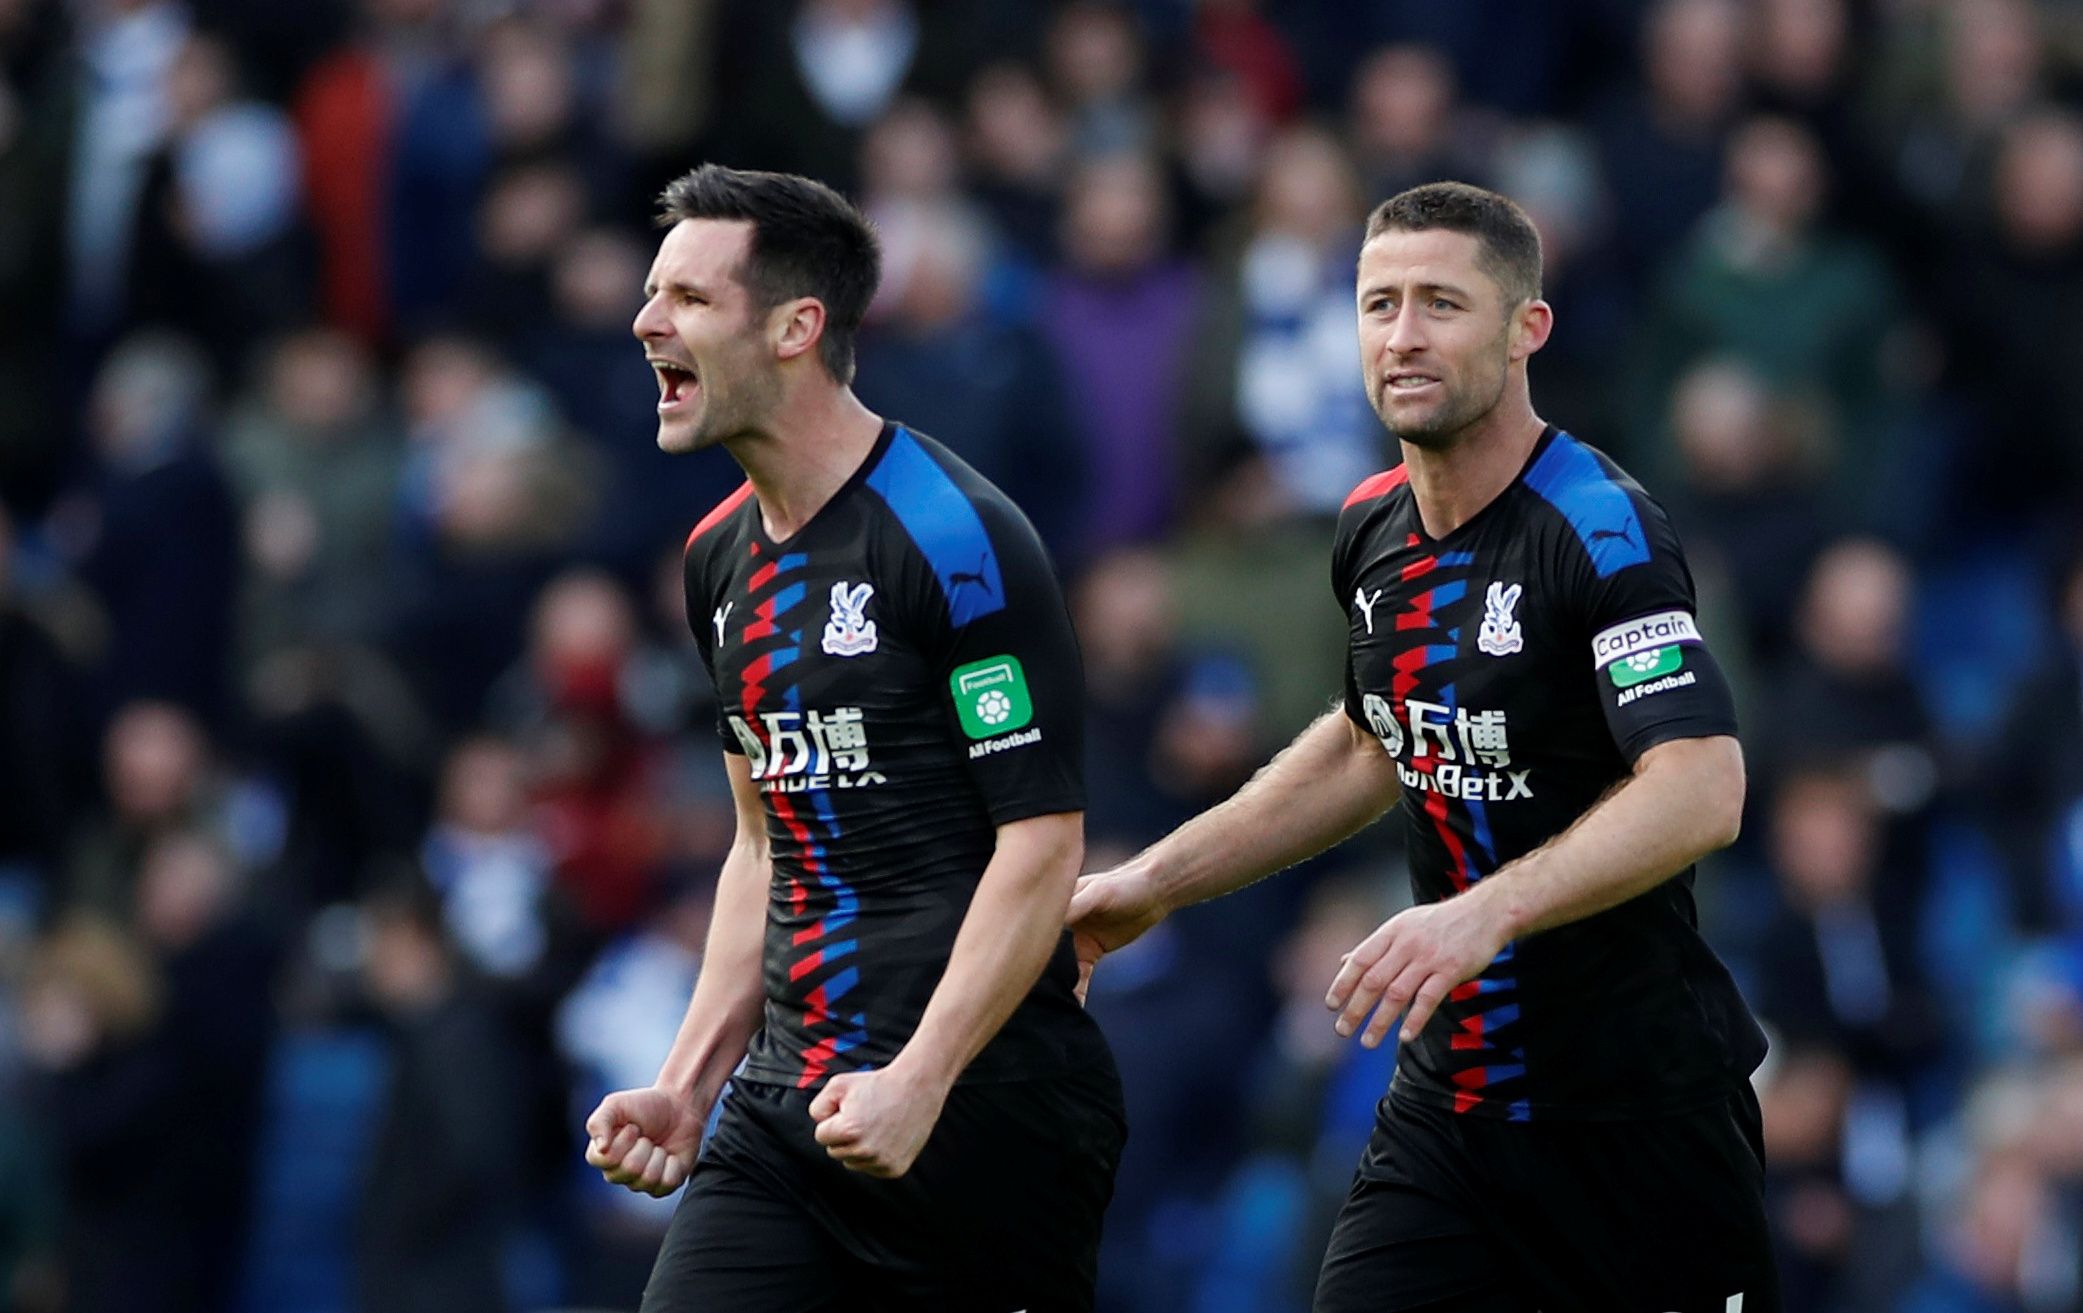 Soccer Football - Premier League - Brighton &amp; Hove Albion v Crystal Palace - The American Express Community Stadium, Brighton, Britain - February 29, 2020  Crystal Palace's Scott Dann and Gary Cahill celebrate after the match   Action Images via Reuters/Paul Childs  EDITORIAL USE ONLY. No use with unauthorized audio, video, data, fixture lists, club/league logos or 